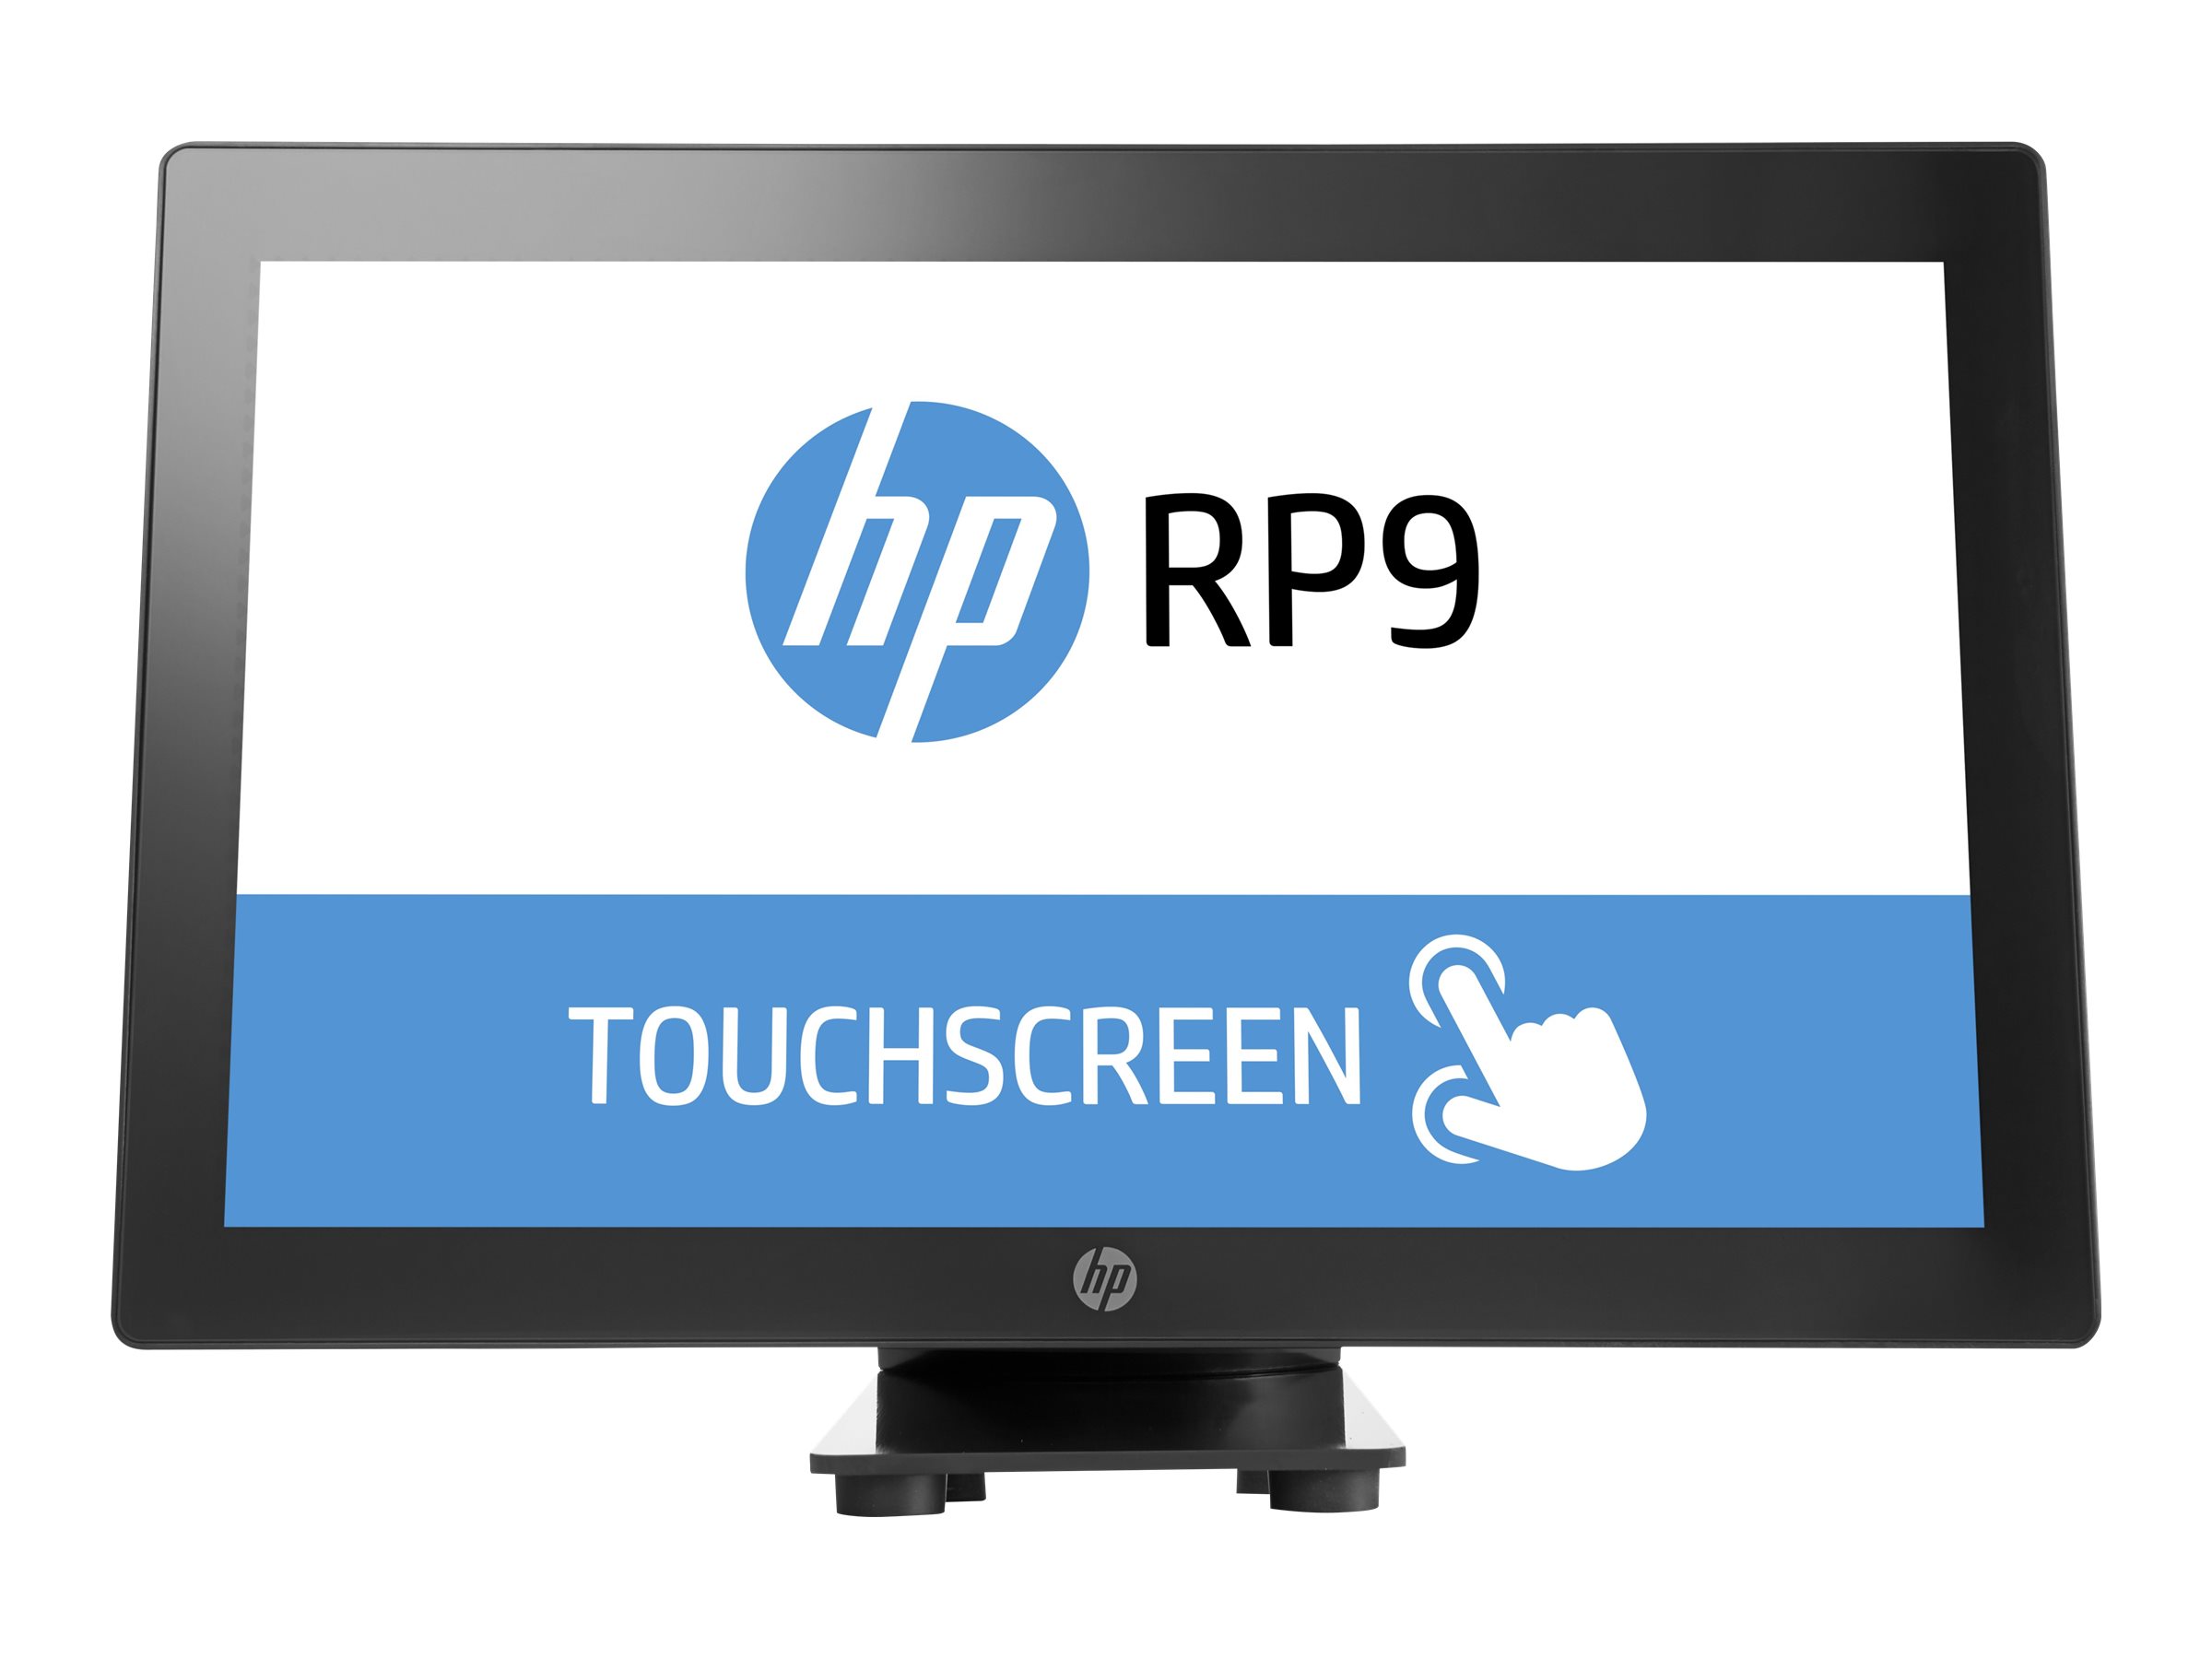 HP RP9 G1 Retail System 9118 | www.shi.ca